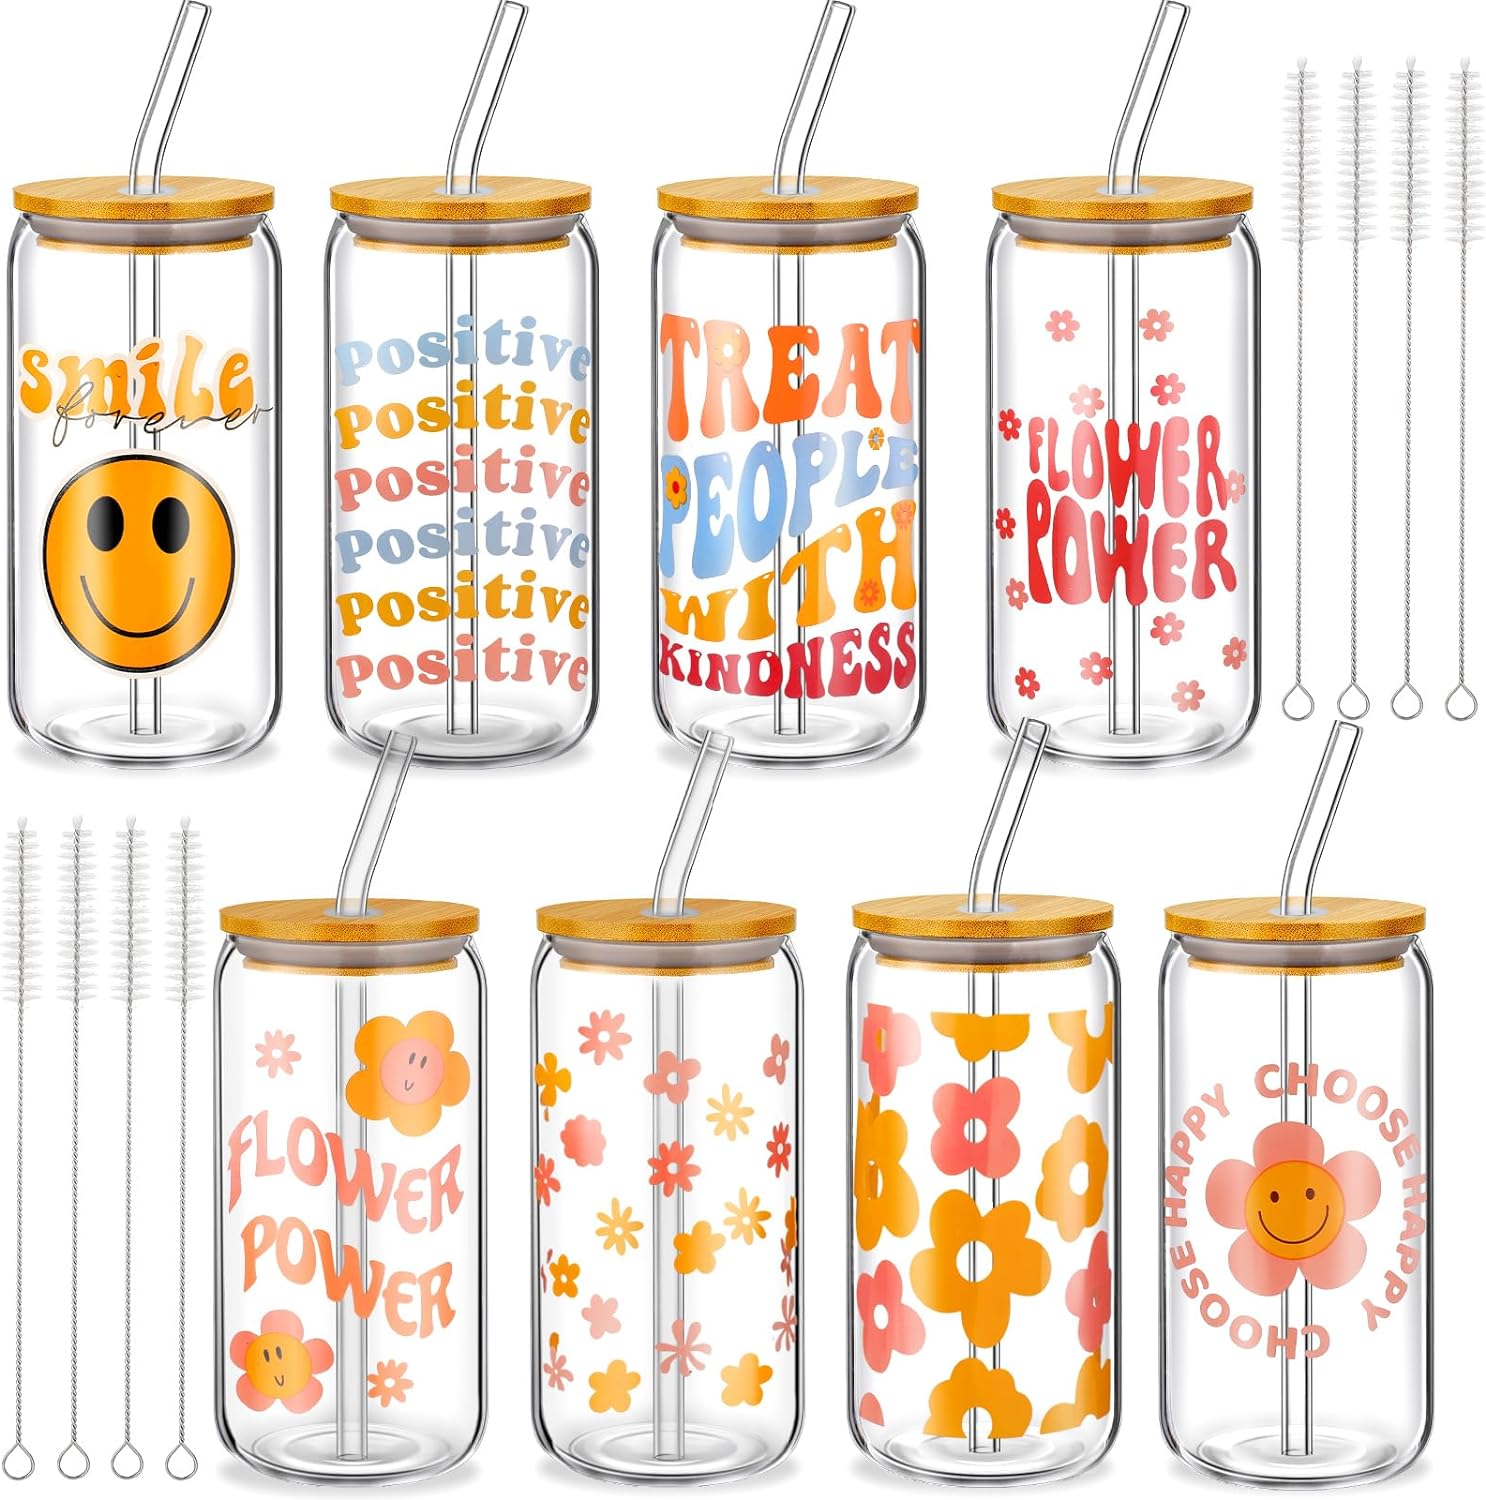 Umigy 8 Pcs Boho Cute Glass Cups with Lids and Straws Daisy Ice Coffee Cup 16 oz Face Groovy Beer Glass Daisy Retro Glass Drinking Jars with Cleaning Brushes for Christmas Gift Party Supplies